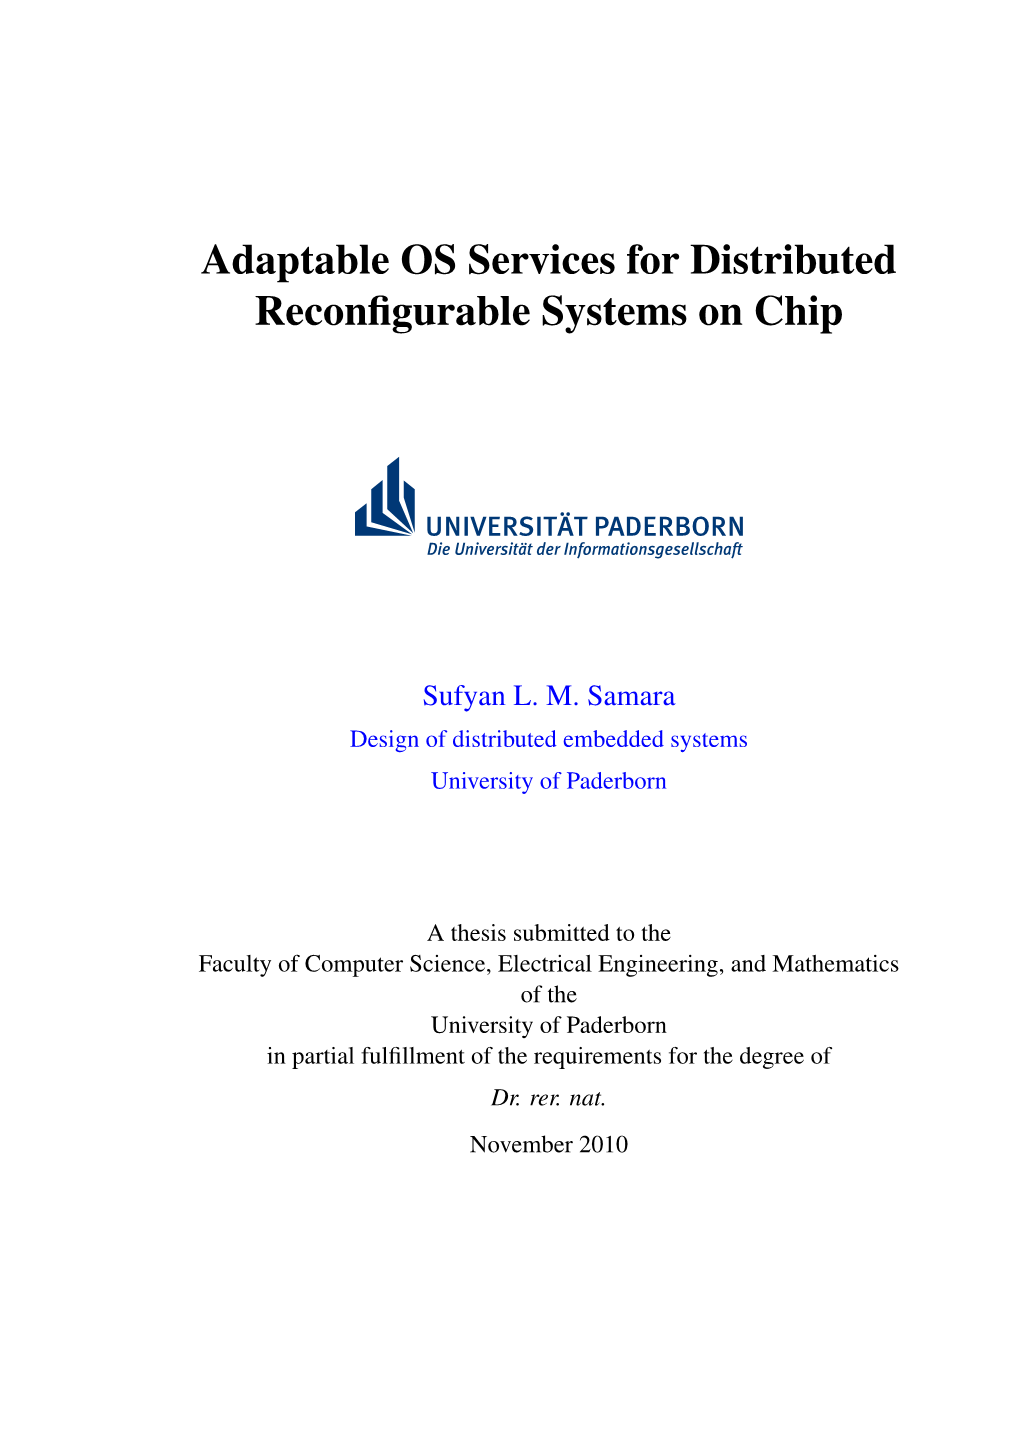 Adaptable OS Services for Distributed Reconfigurable Systems On